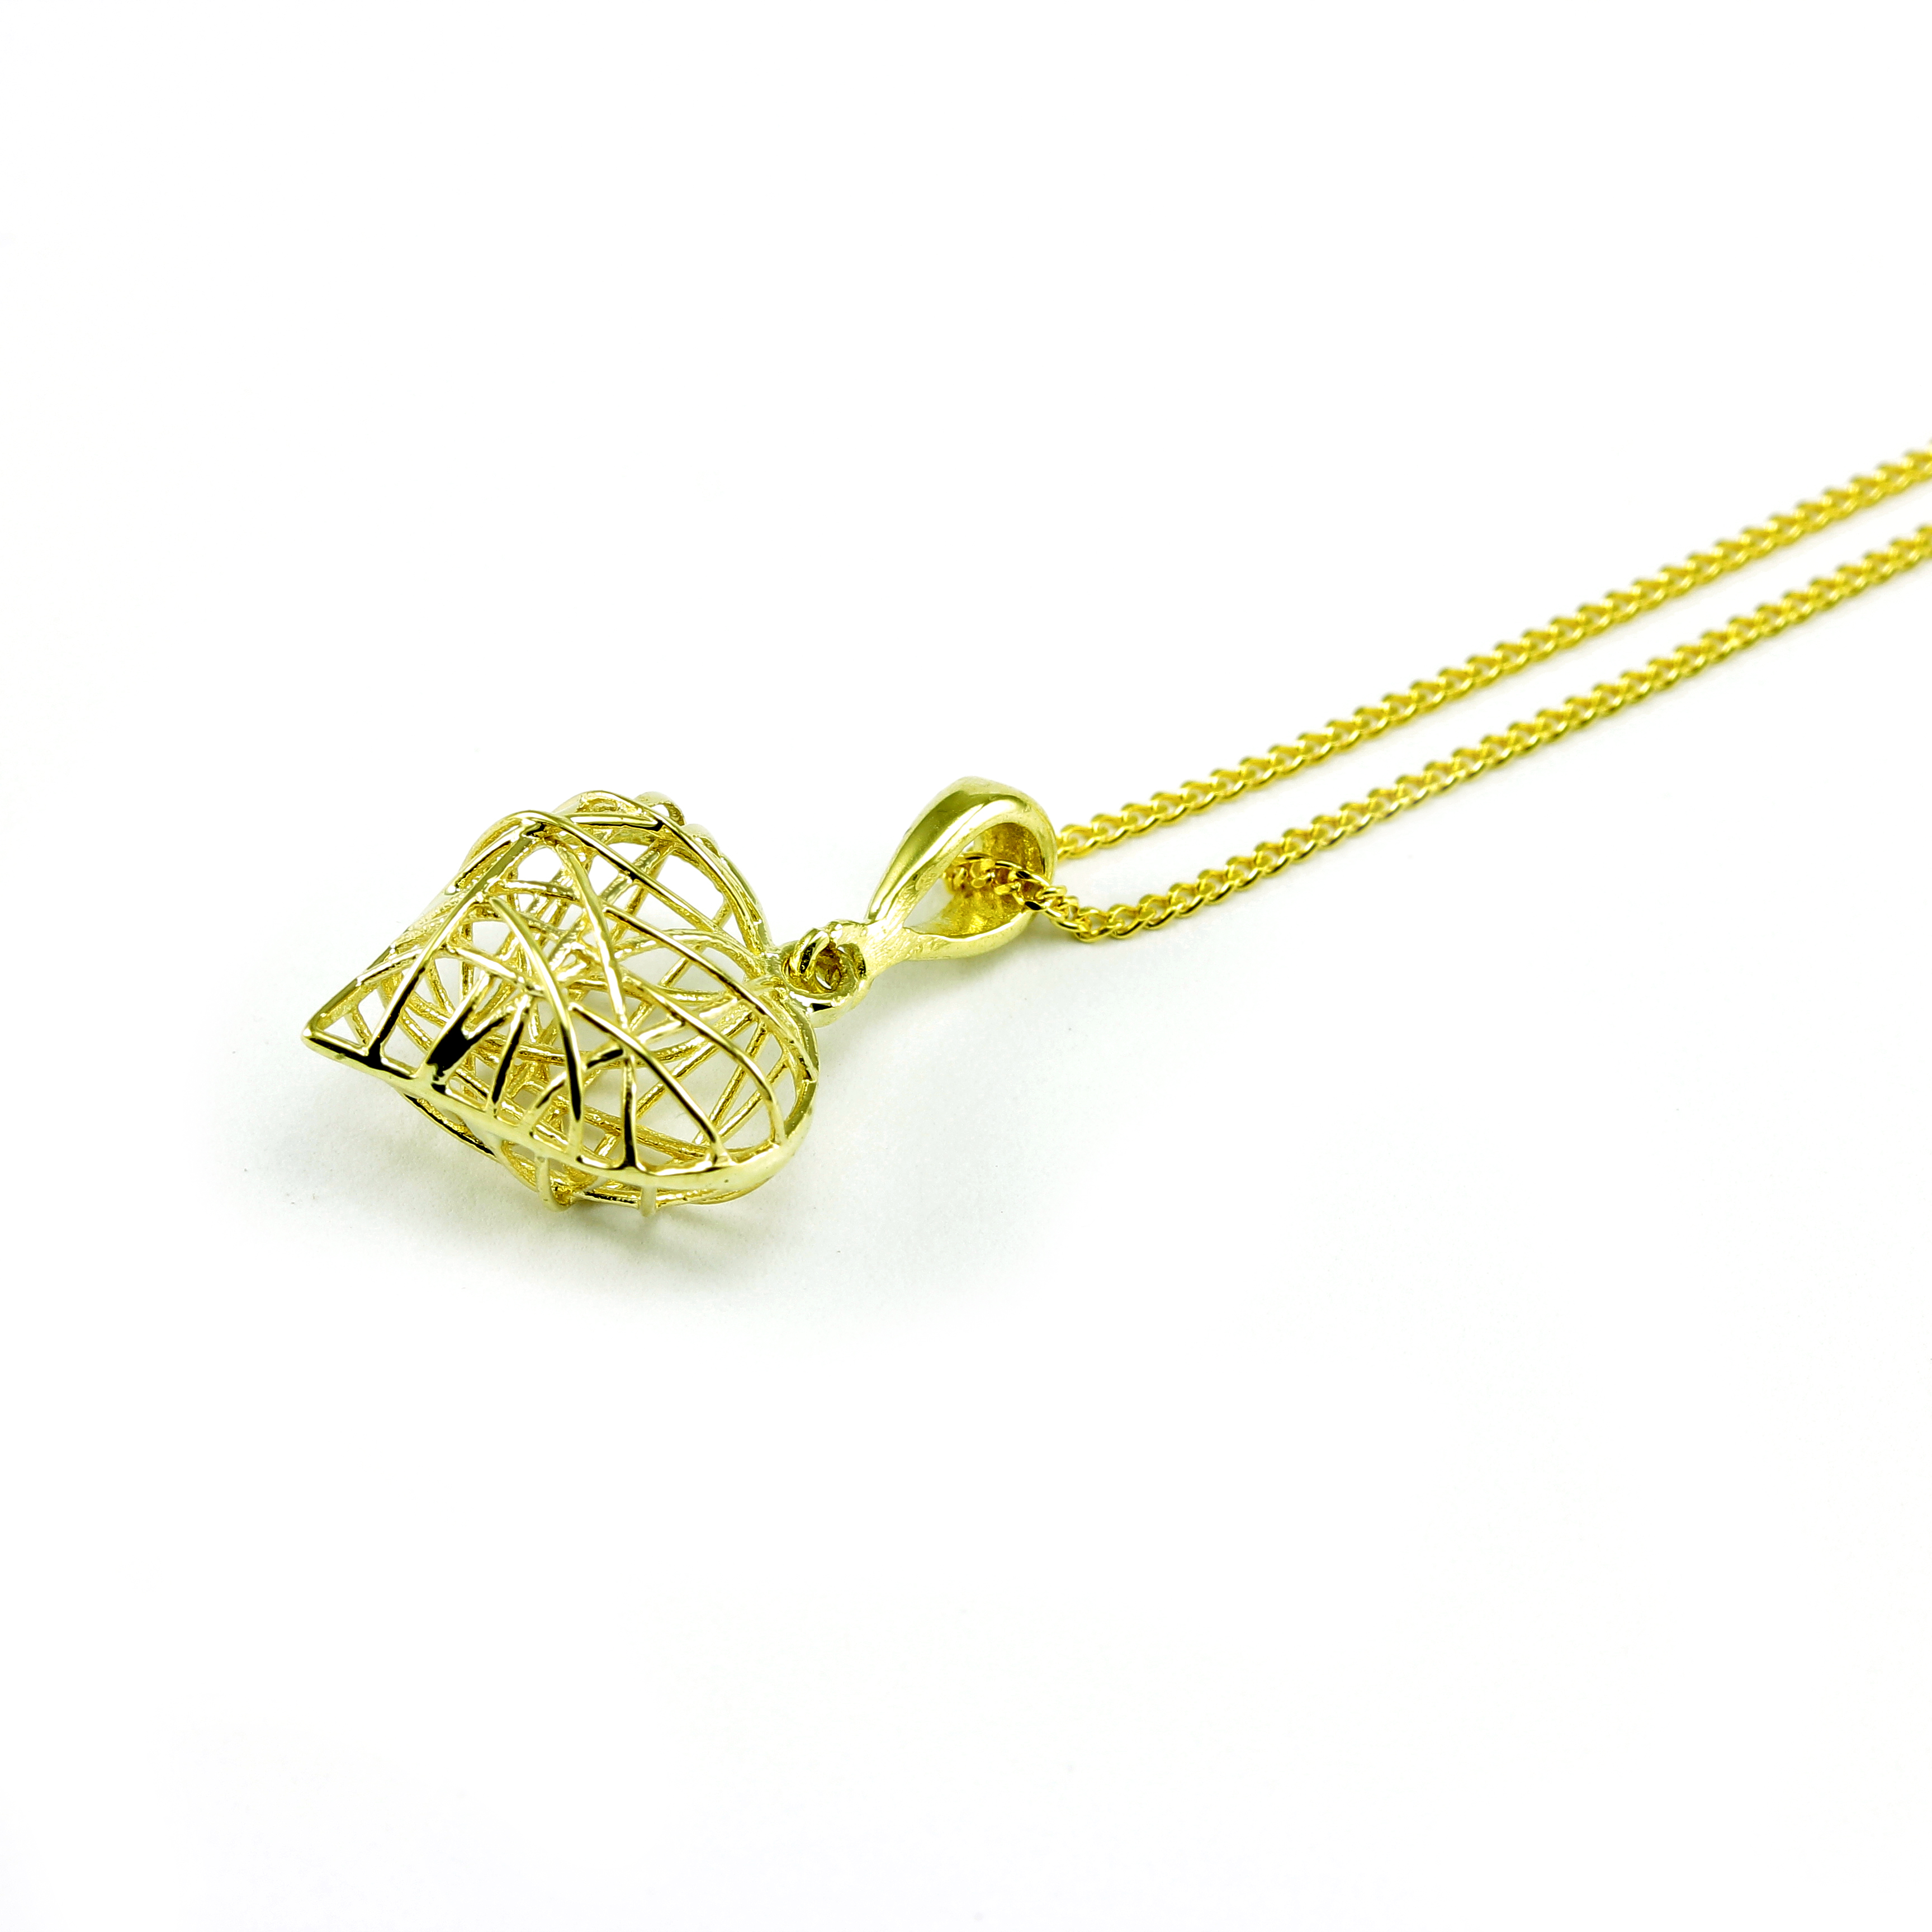 Romantic and graceful; capture her heart and her soul this Valentine's Day with this gorgeous 9ct Yellow Gold Caged Heart Necklace. Cage her heart and make her yours with the gift of this beautiful necklace. £135